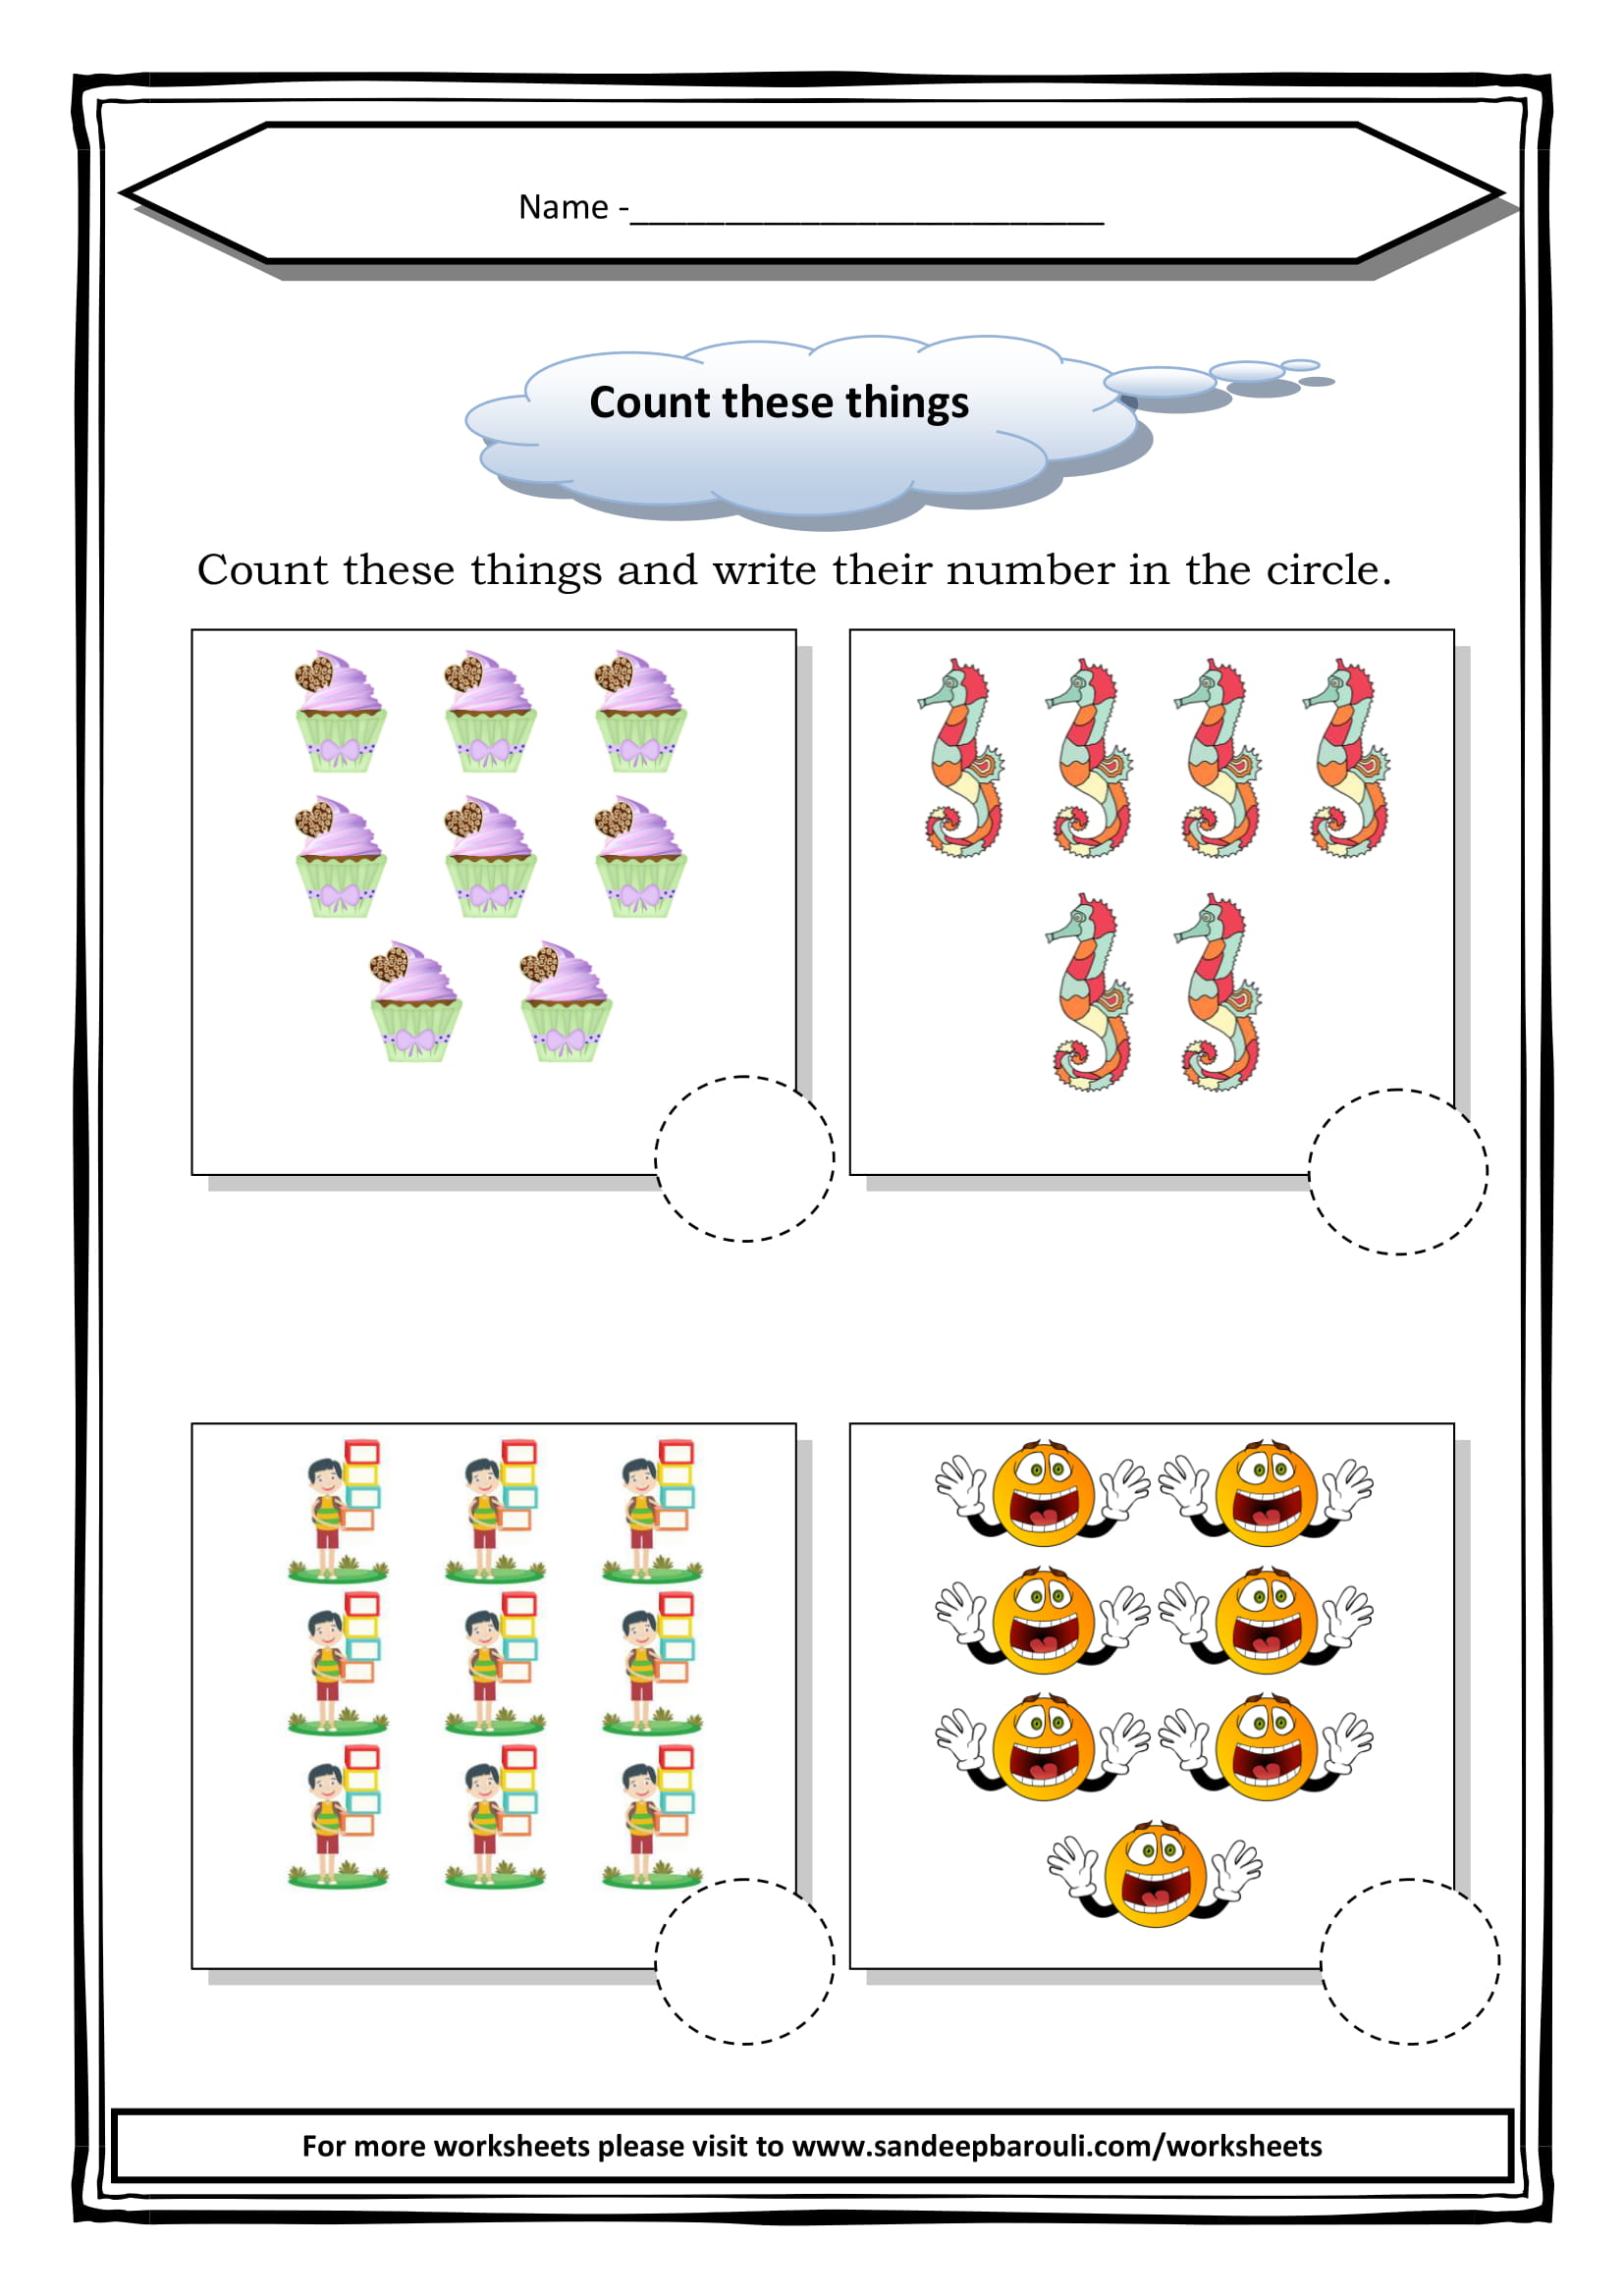 Count-these-things-Worksheet-for-class-1